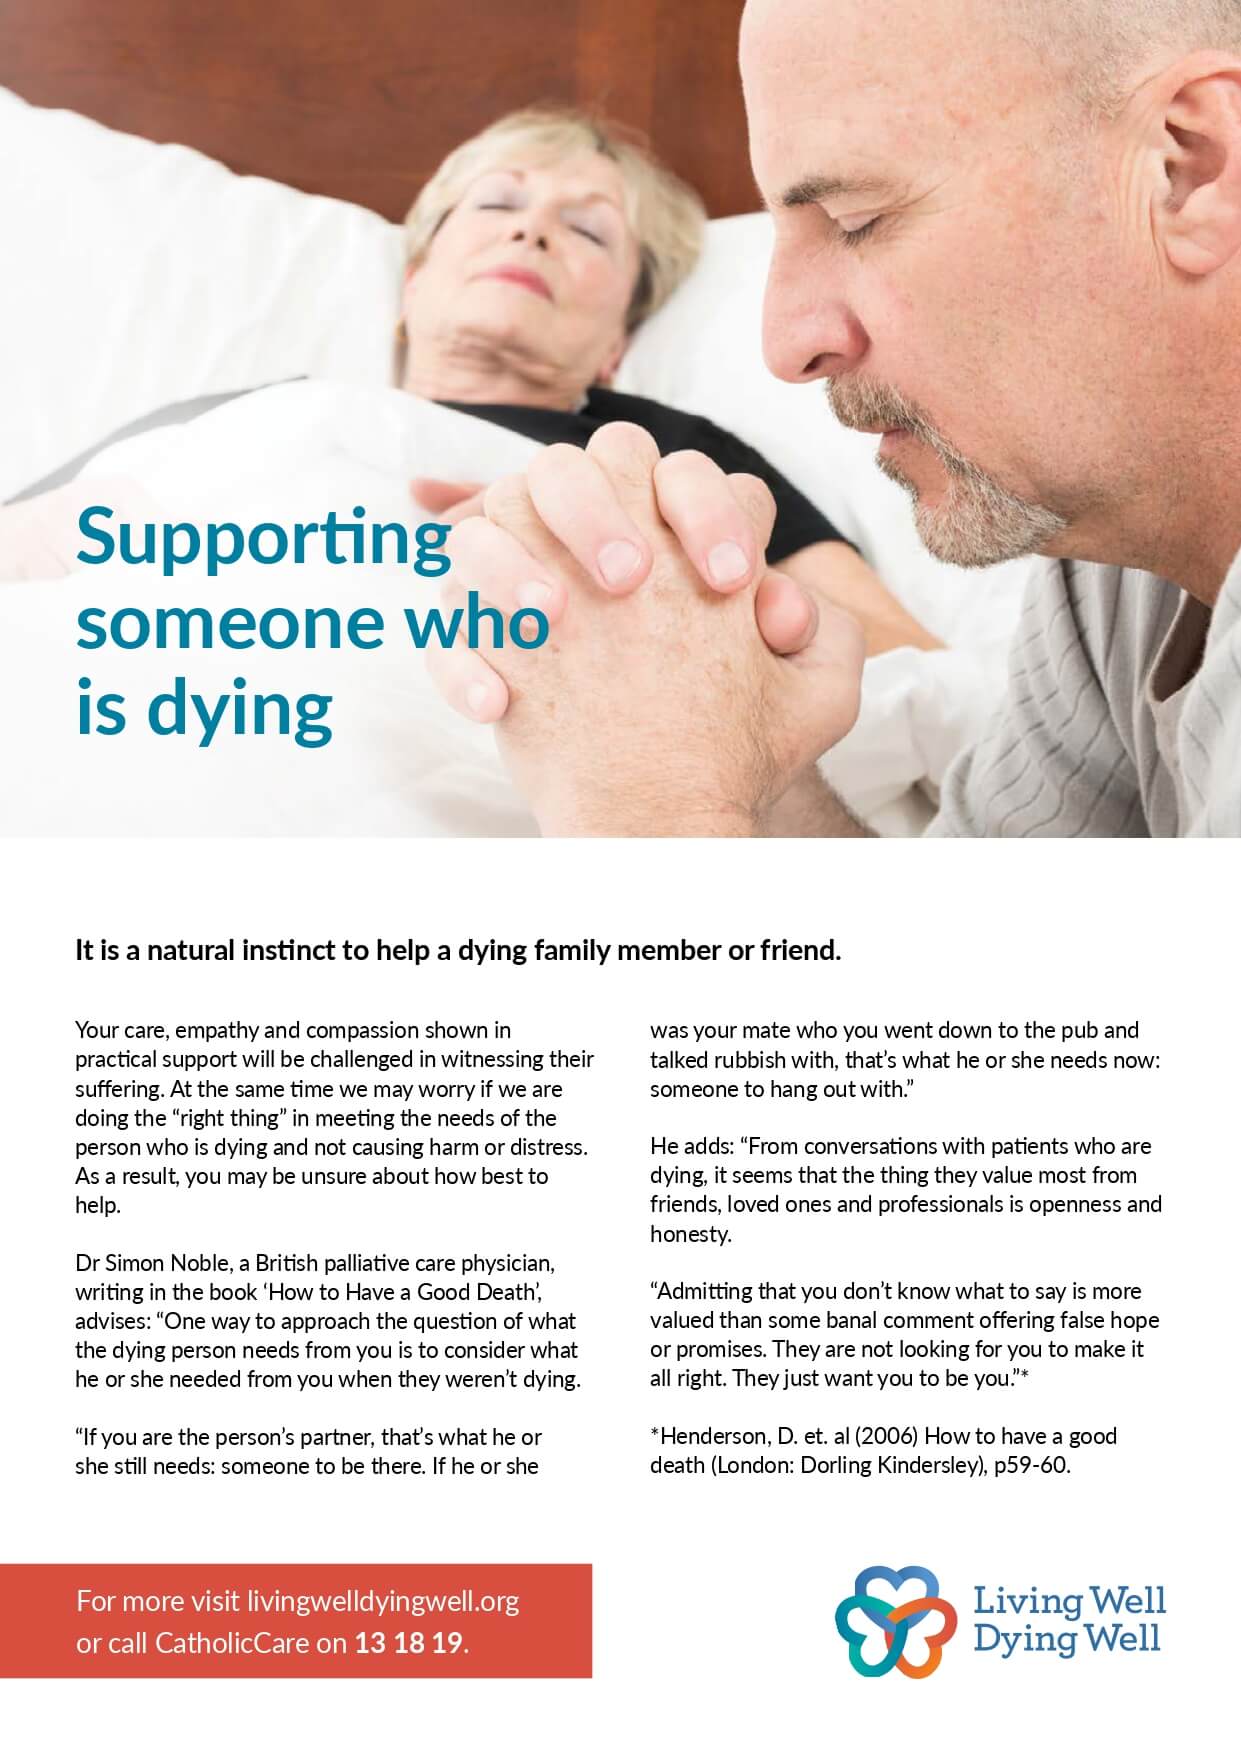 Supporting someone who is dying fact sheet